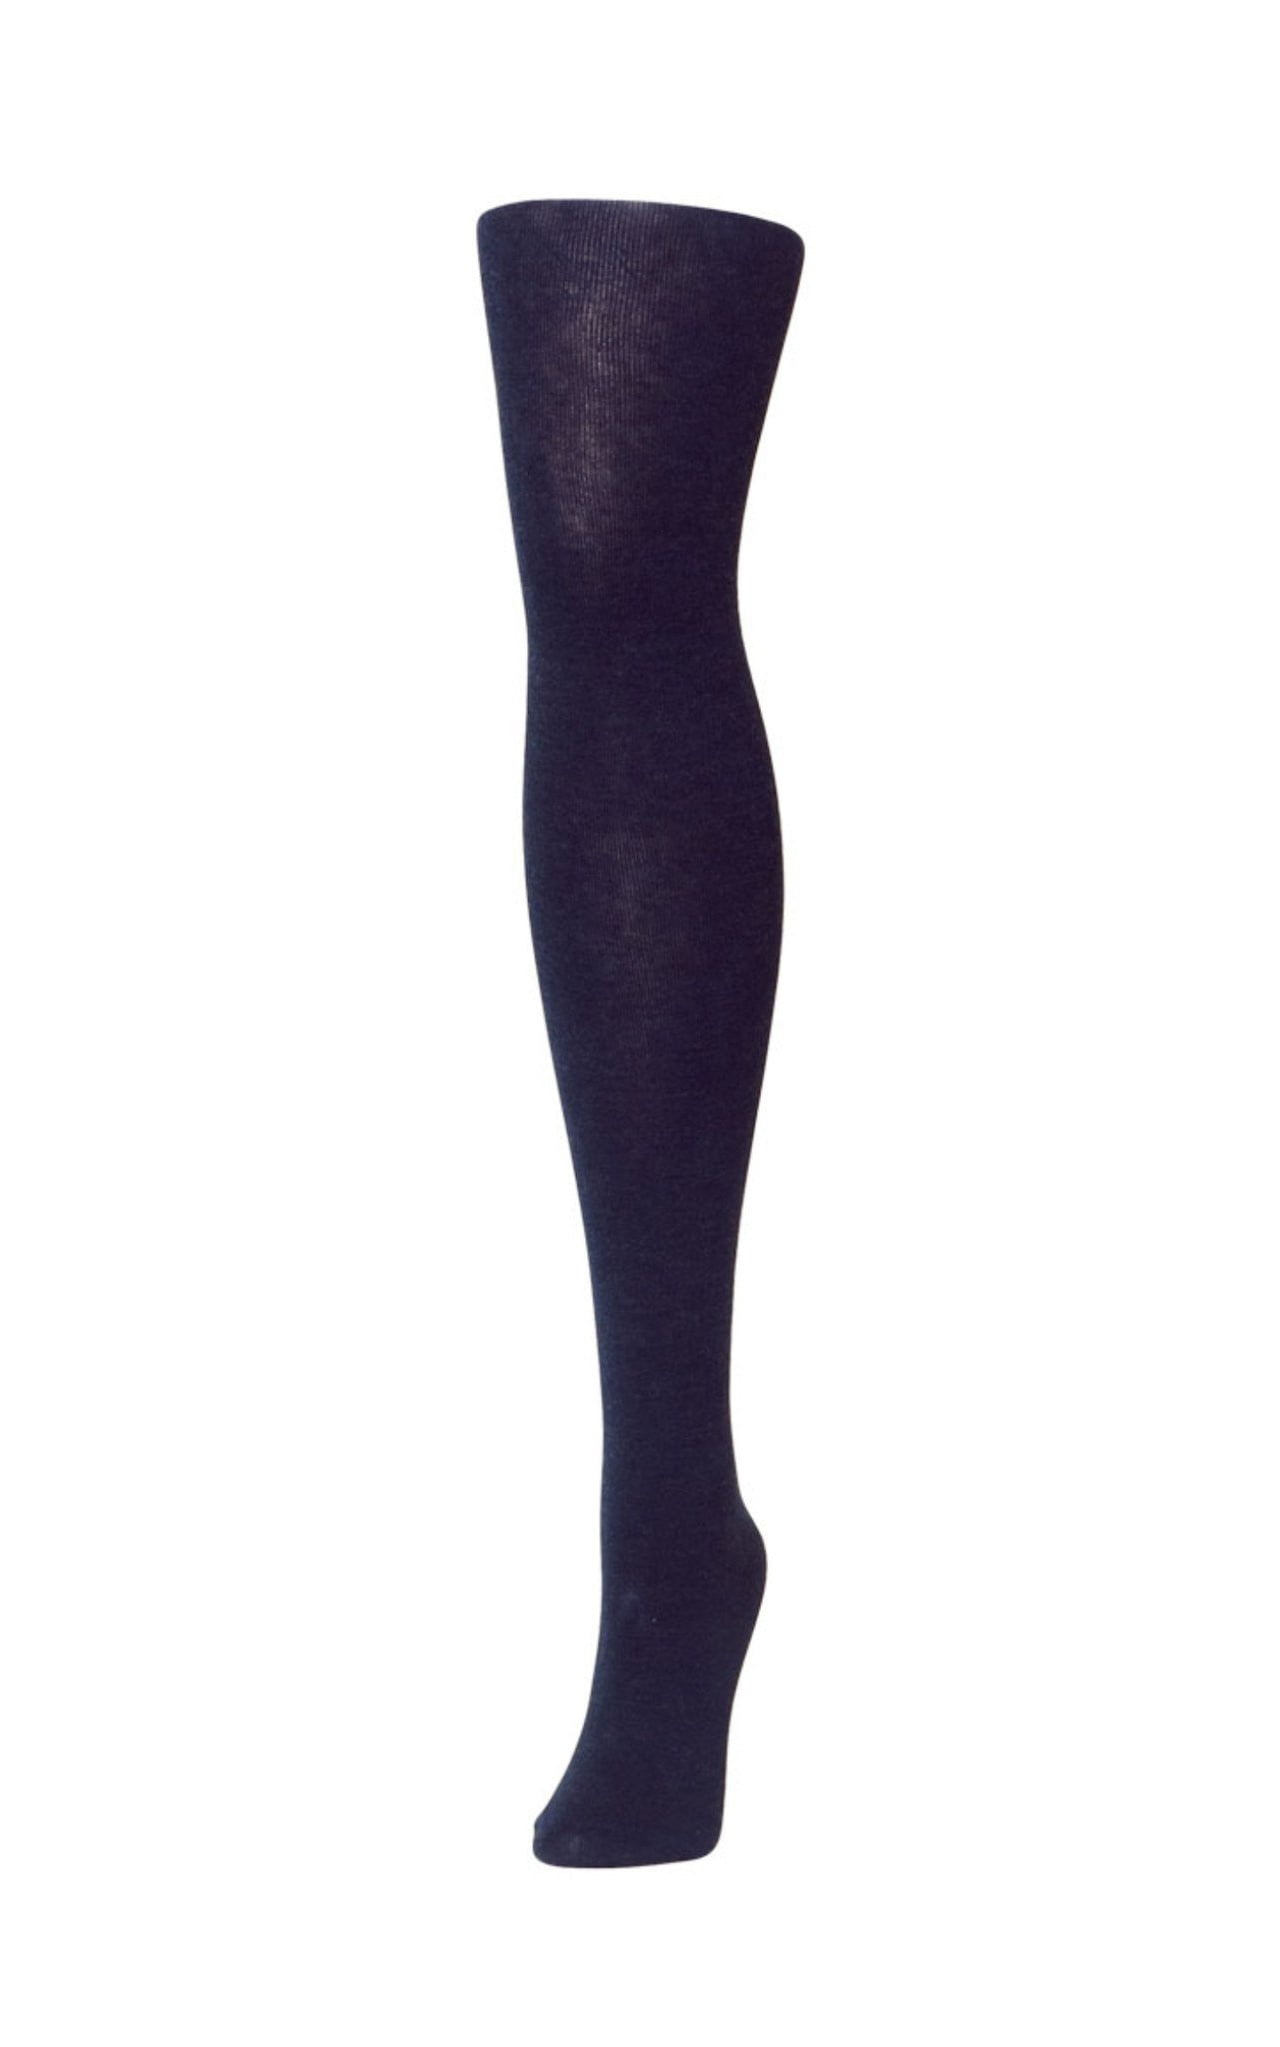 Spot Bamboo Tights in Petrol Blue by Thought 